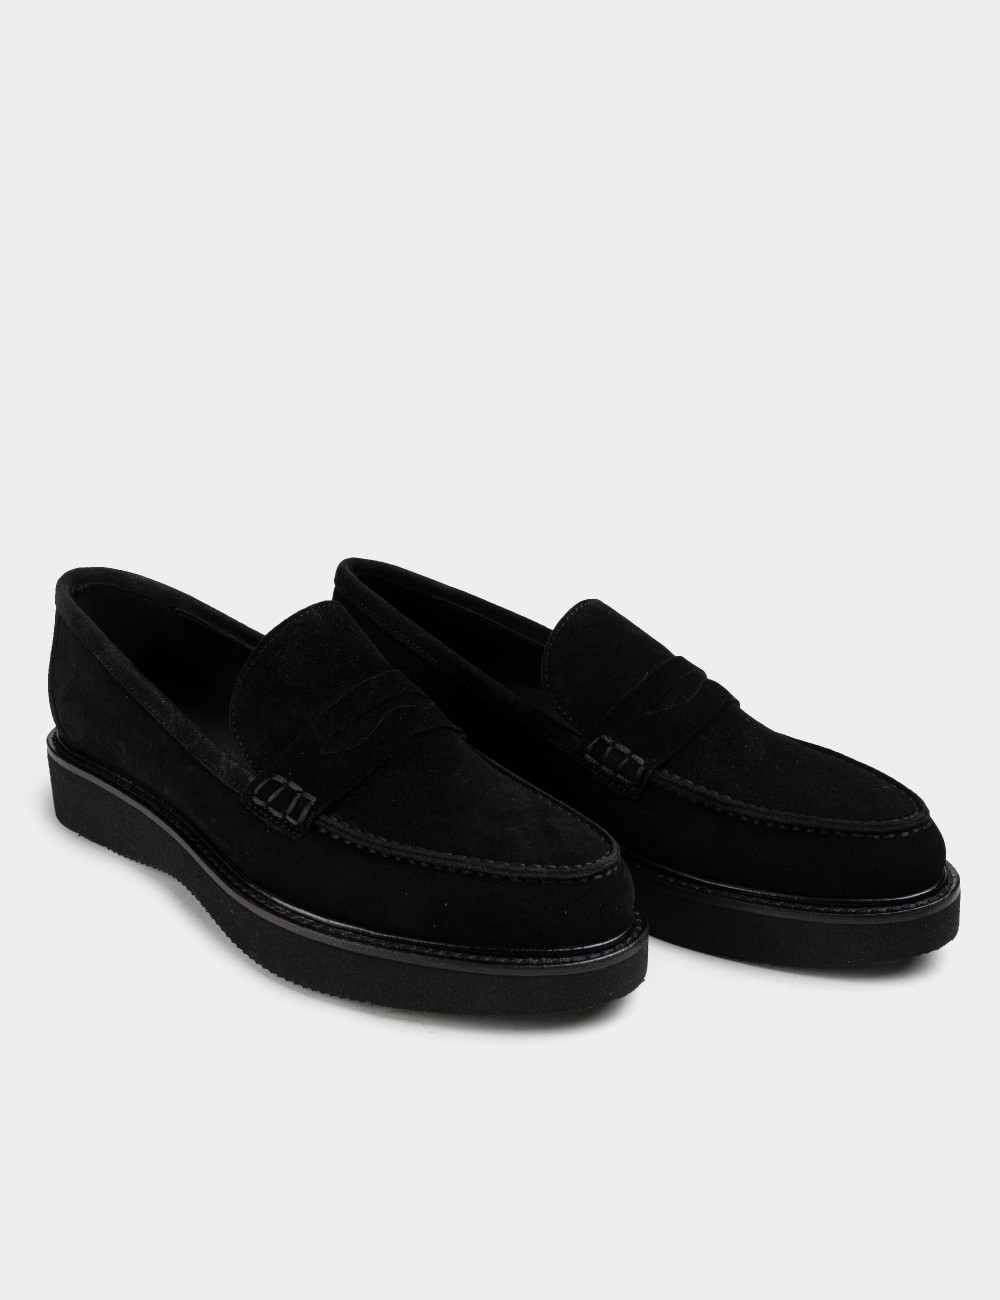 Black Suede Leather Loafers - 01574ZSYHE04